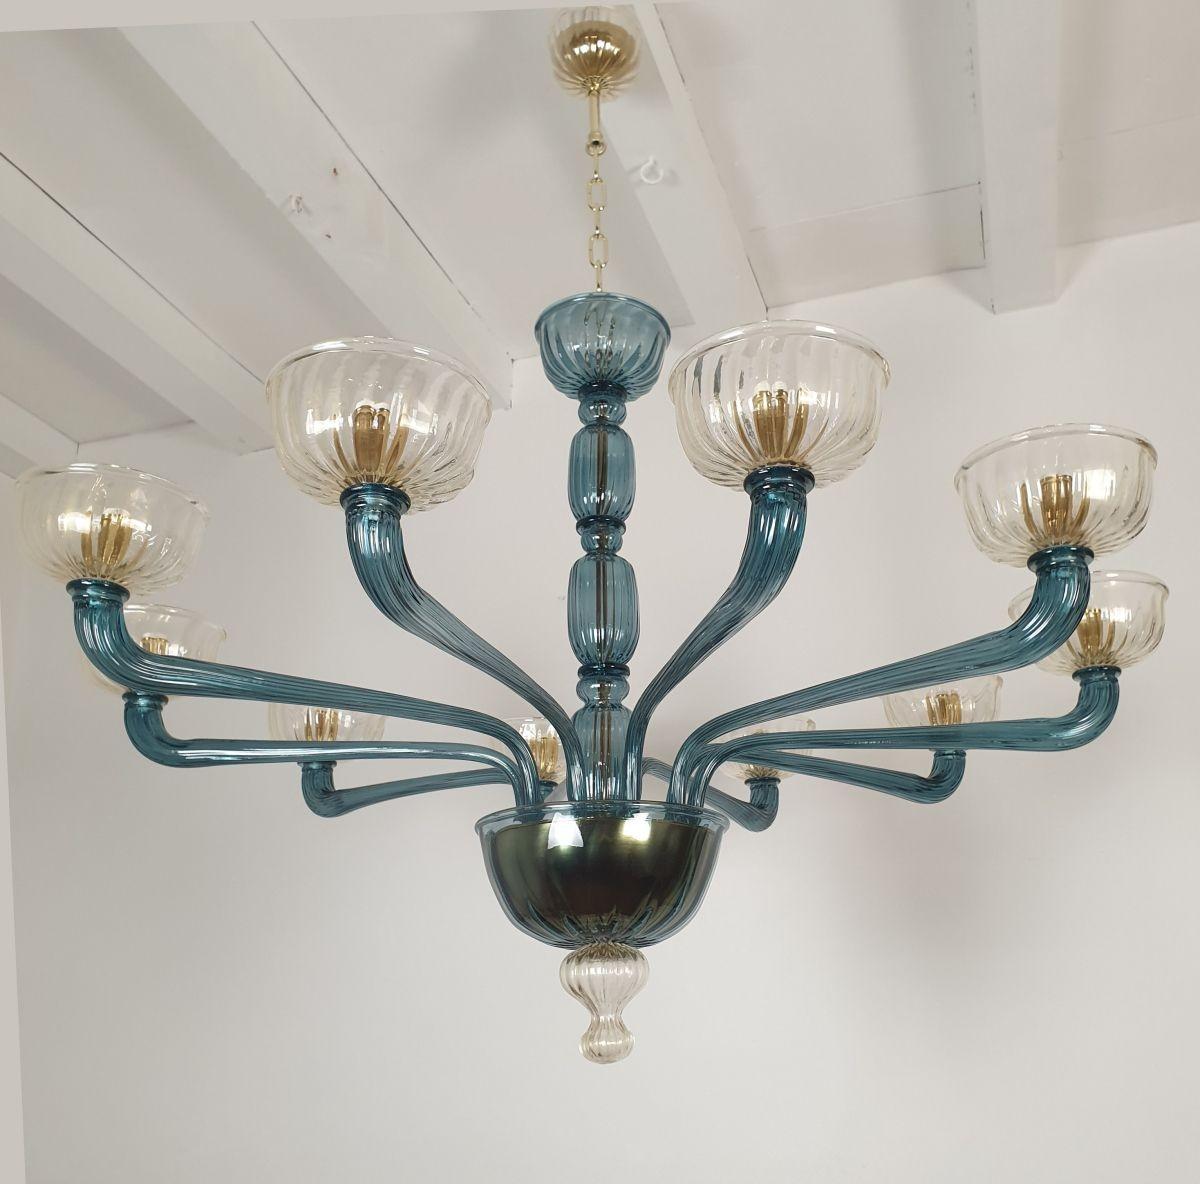 Large Mid-Century Modern petrol blue and clear-gold Murano glass chandelier Venini style, Italy 1970s
The neoclassical style Murano glass chandelier has ten light and arms.
The chandelier is made of a translucent petrol blue Murano glass and clear